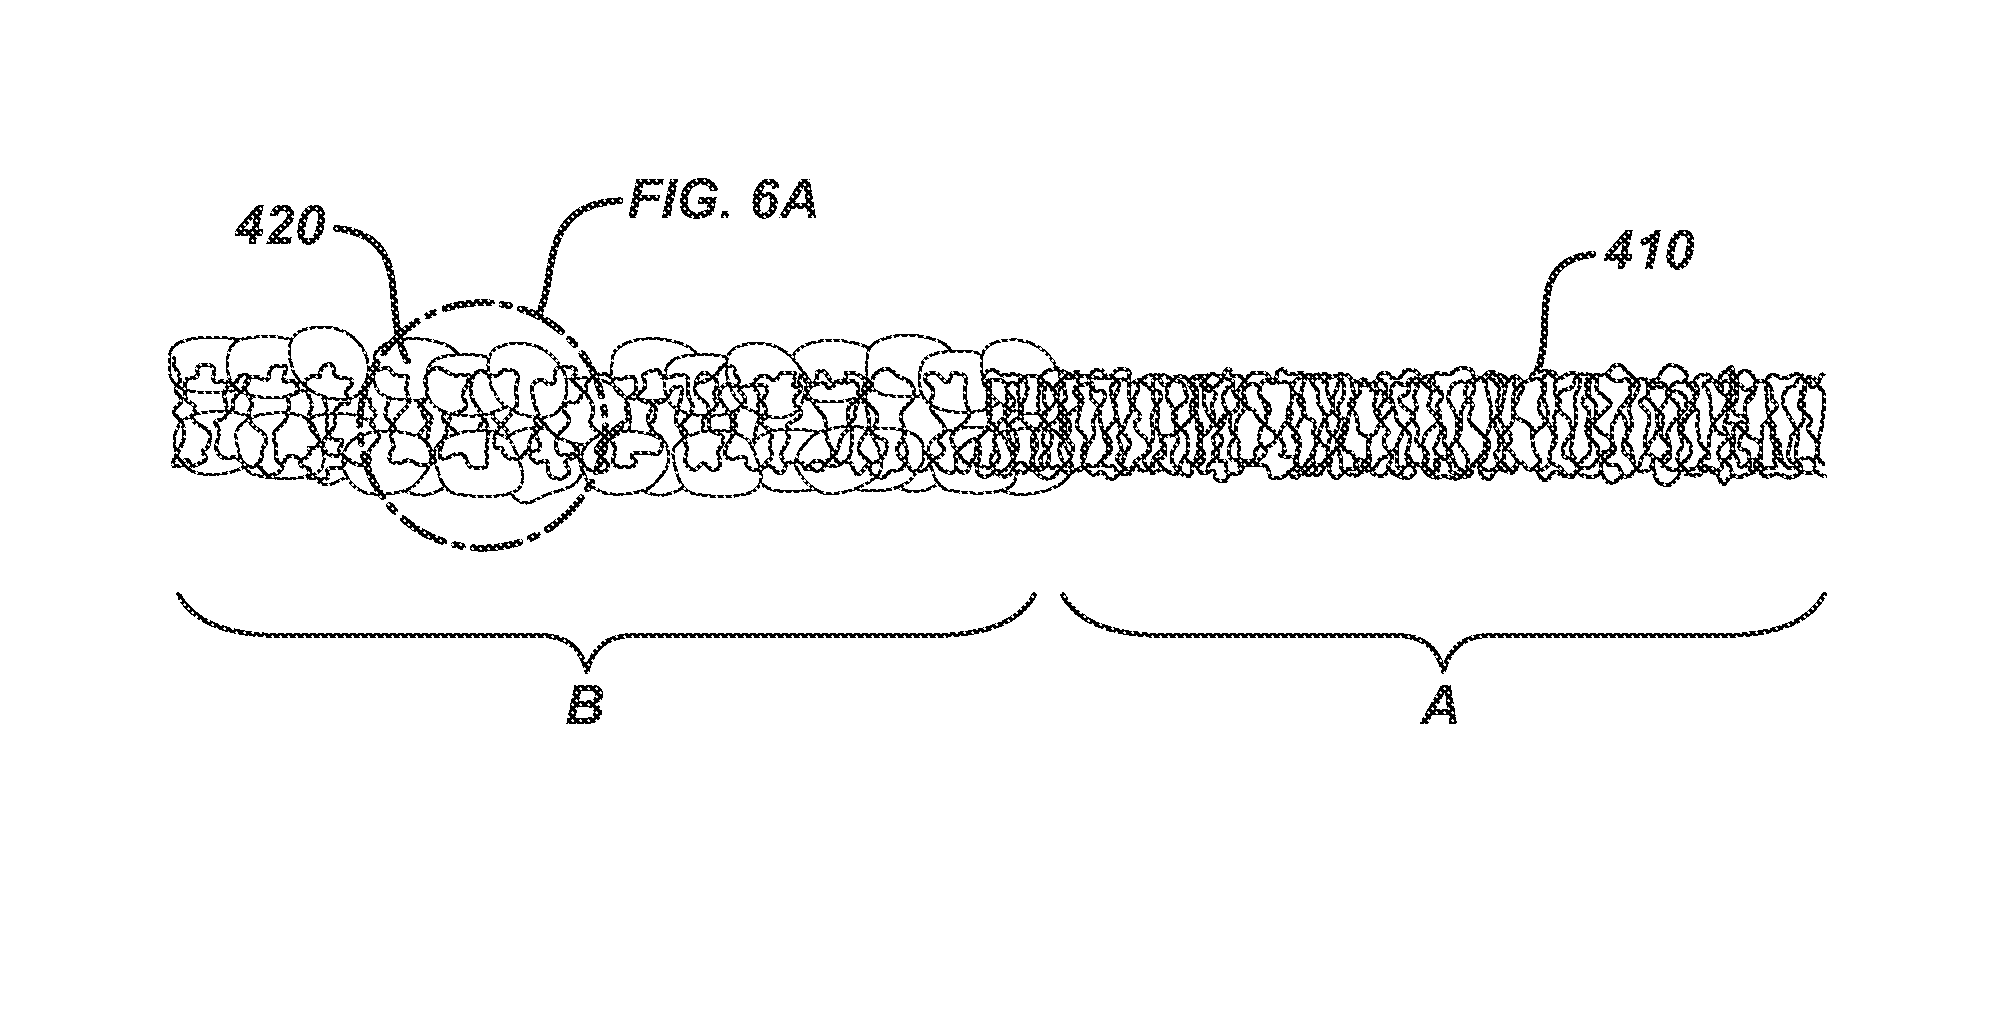 Randomly Uniform Three Dimensional Tissue Scaffold of Absorbable and Non-Absorbable Materials